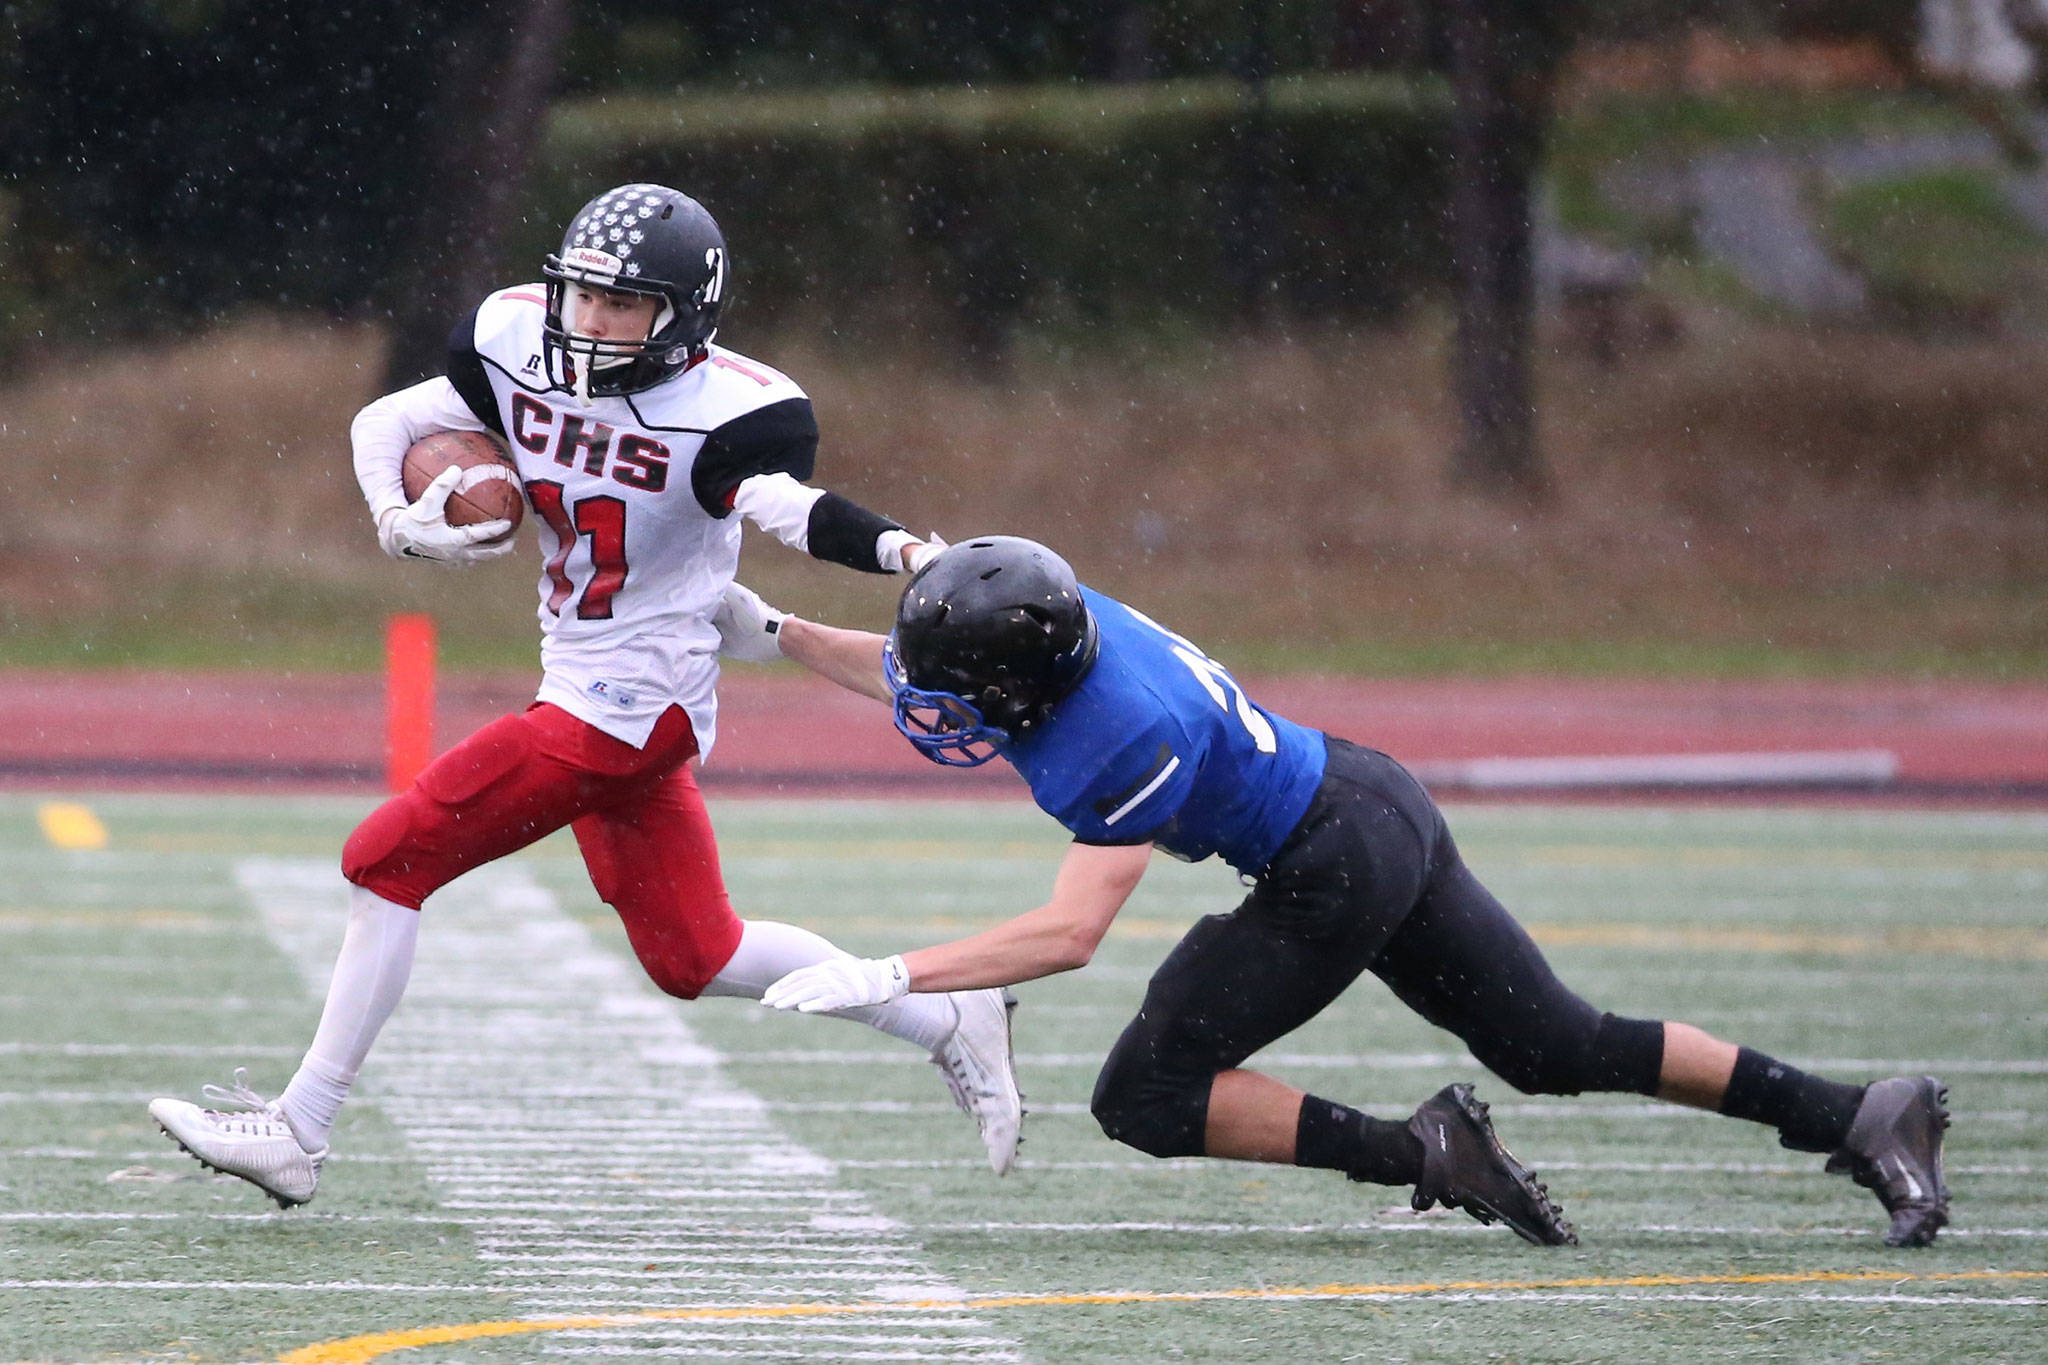 Cameron Toomey-Stout breaks a tackle on the way to a long touchdown reception against Bellevue Christian last season. (Photo by John Fisken)